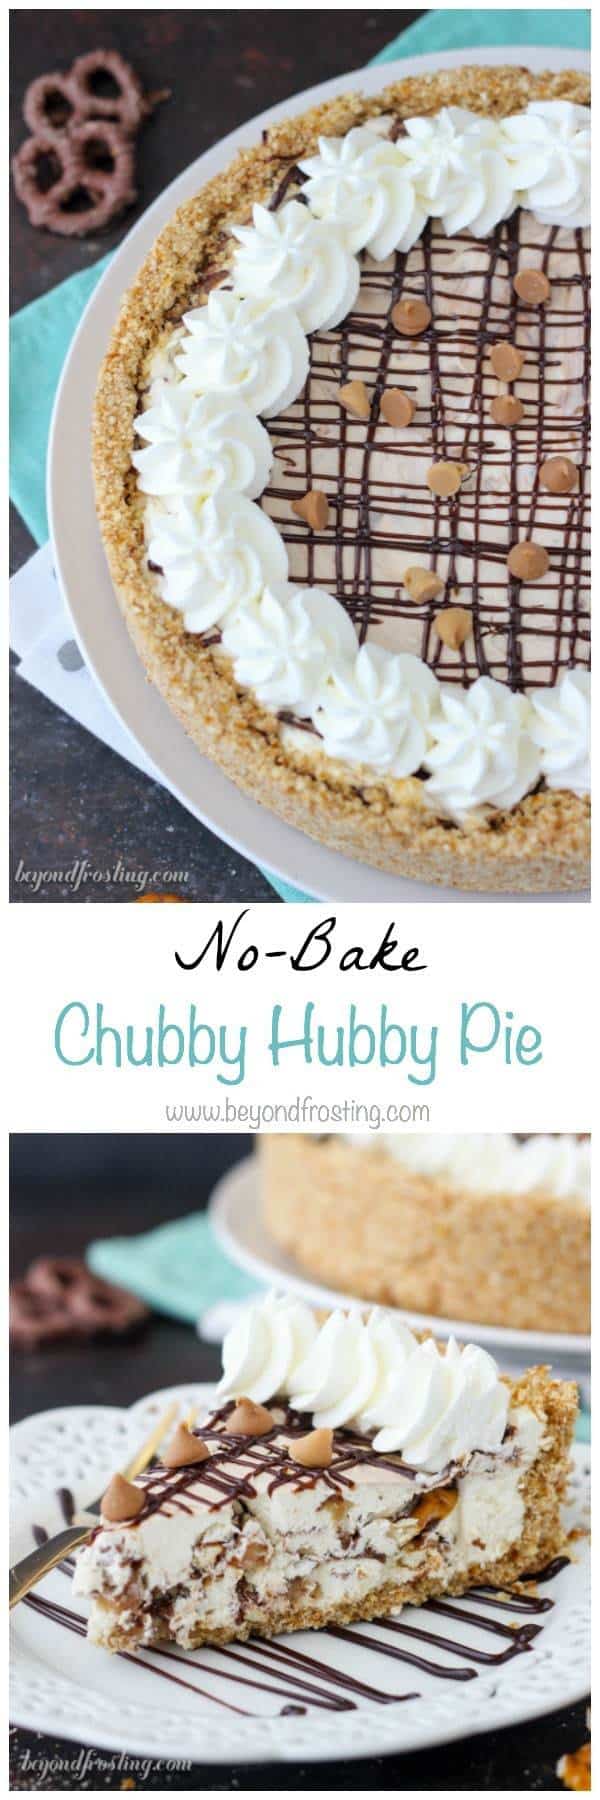 This No-Bake Chubby Hubby Pie is a salty pretzel crust with a vanilla malt filling with chocolate covered pretzels, peanut butter chips and a hot fudge swirl. If you love the Ben and Jerry’s Chubby Hubby Ice Cream you’ll love this pie! Grab the recipe at beyondfrosting.com